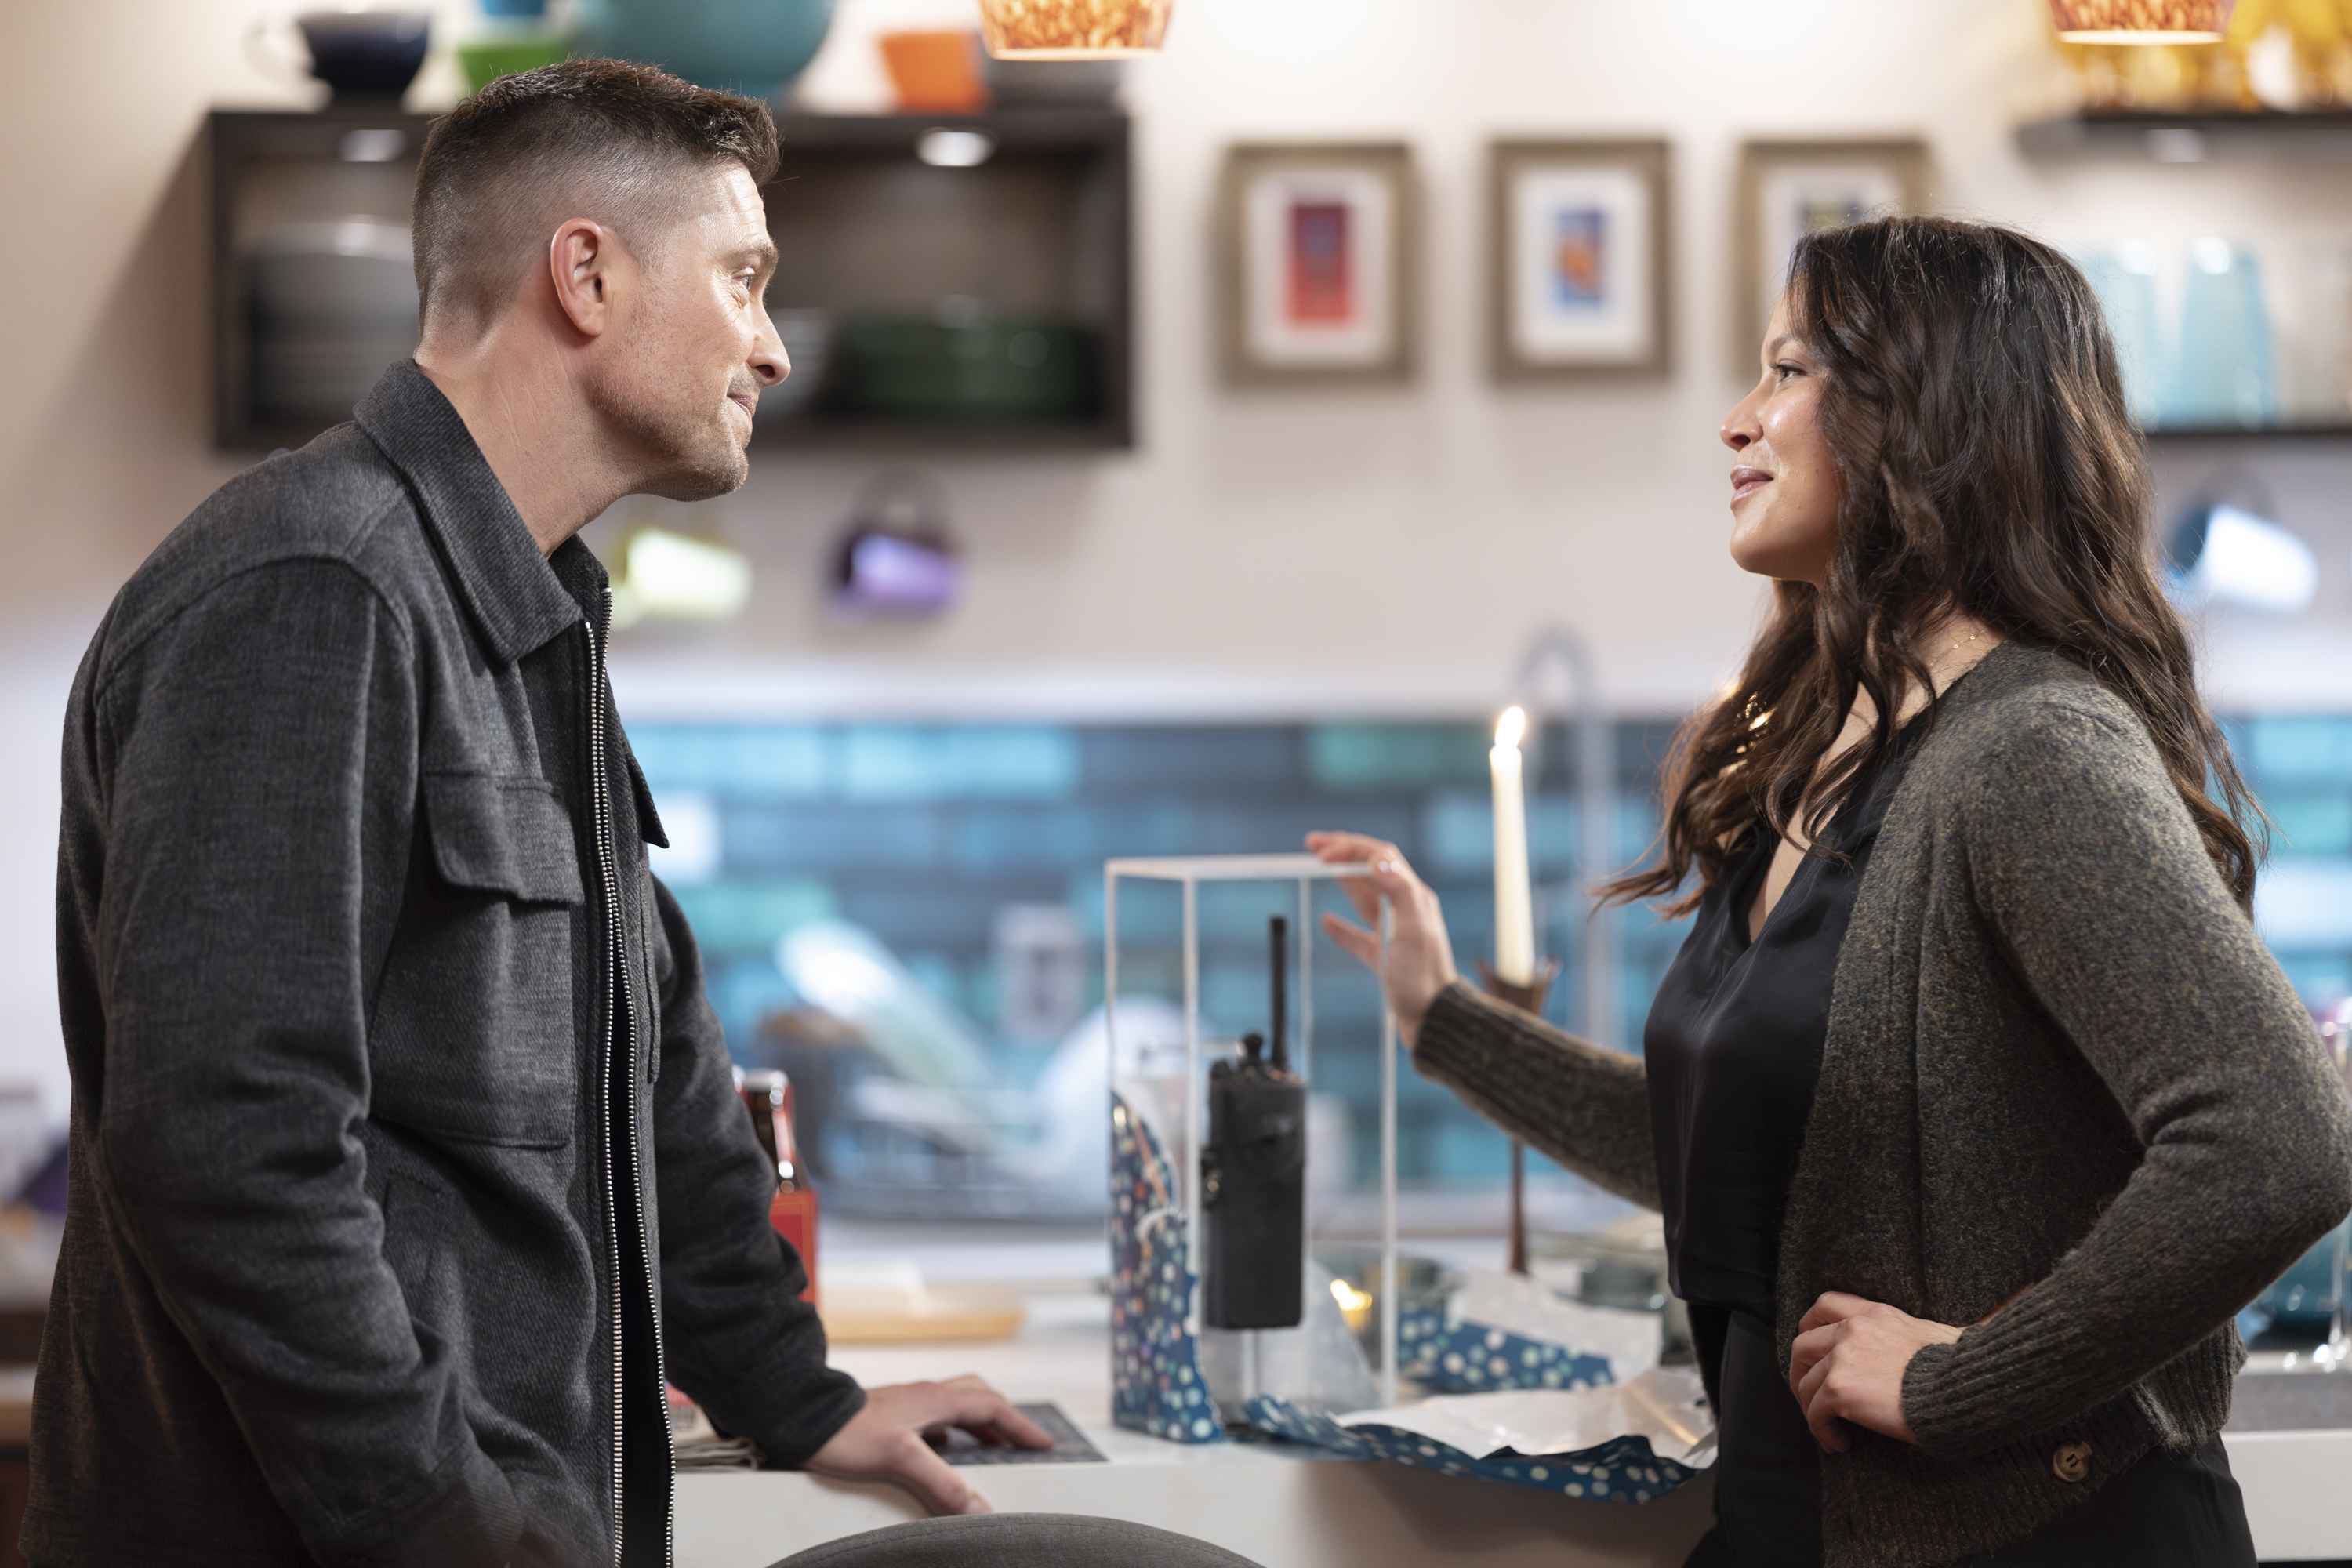 The Rookie 6x05, "The Vow" -- ERIC WINTER, MELISSA O'NEIL